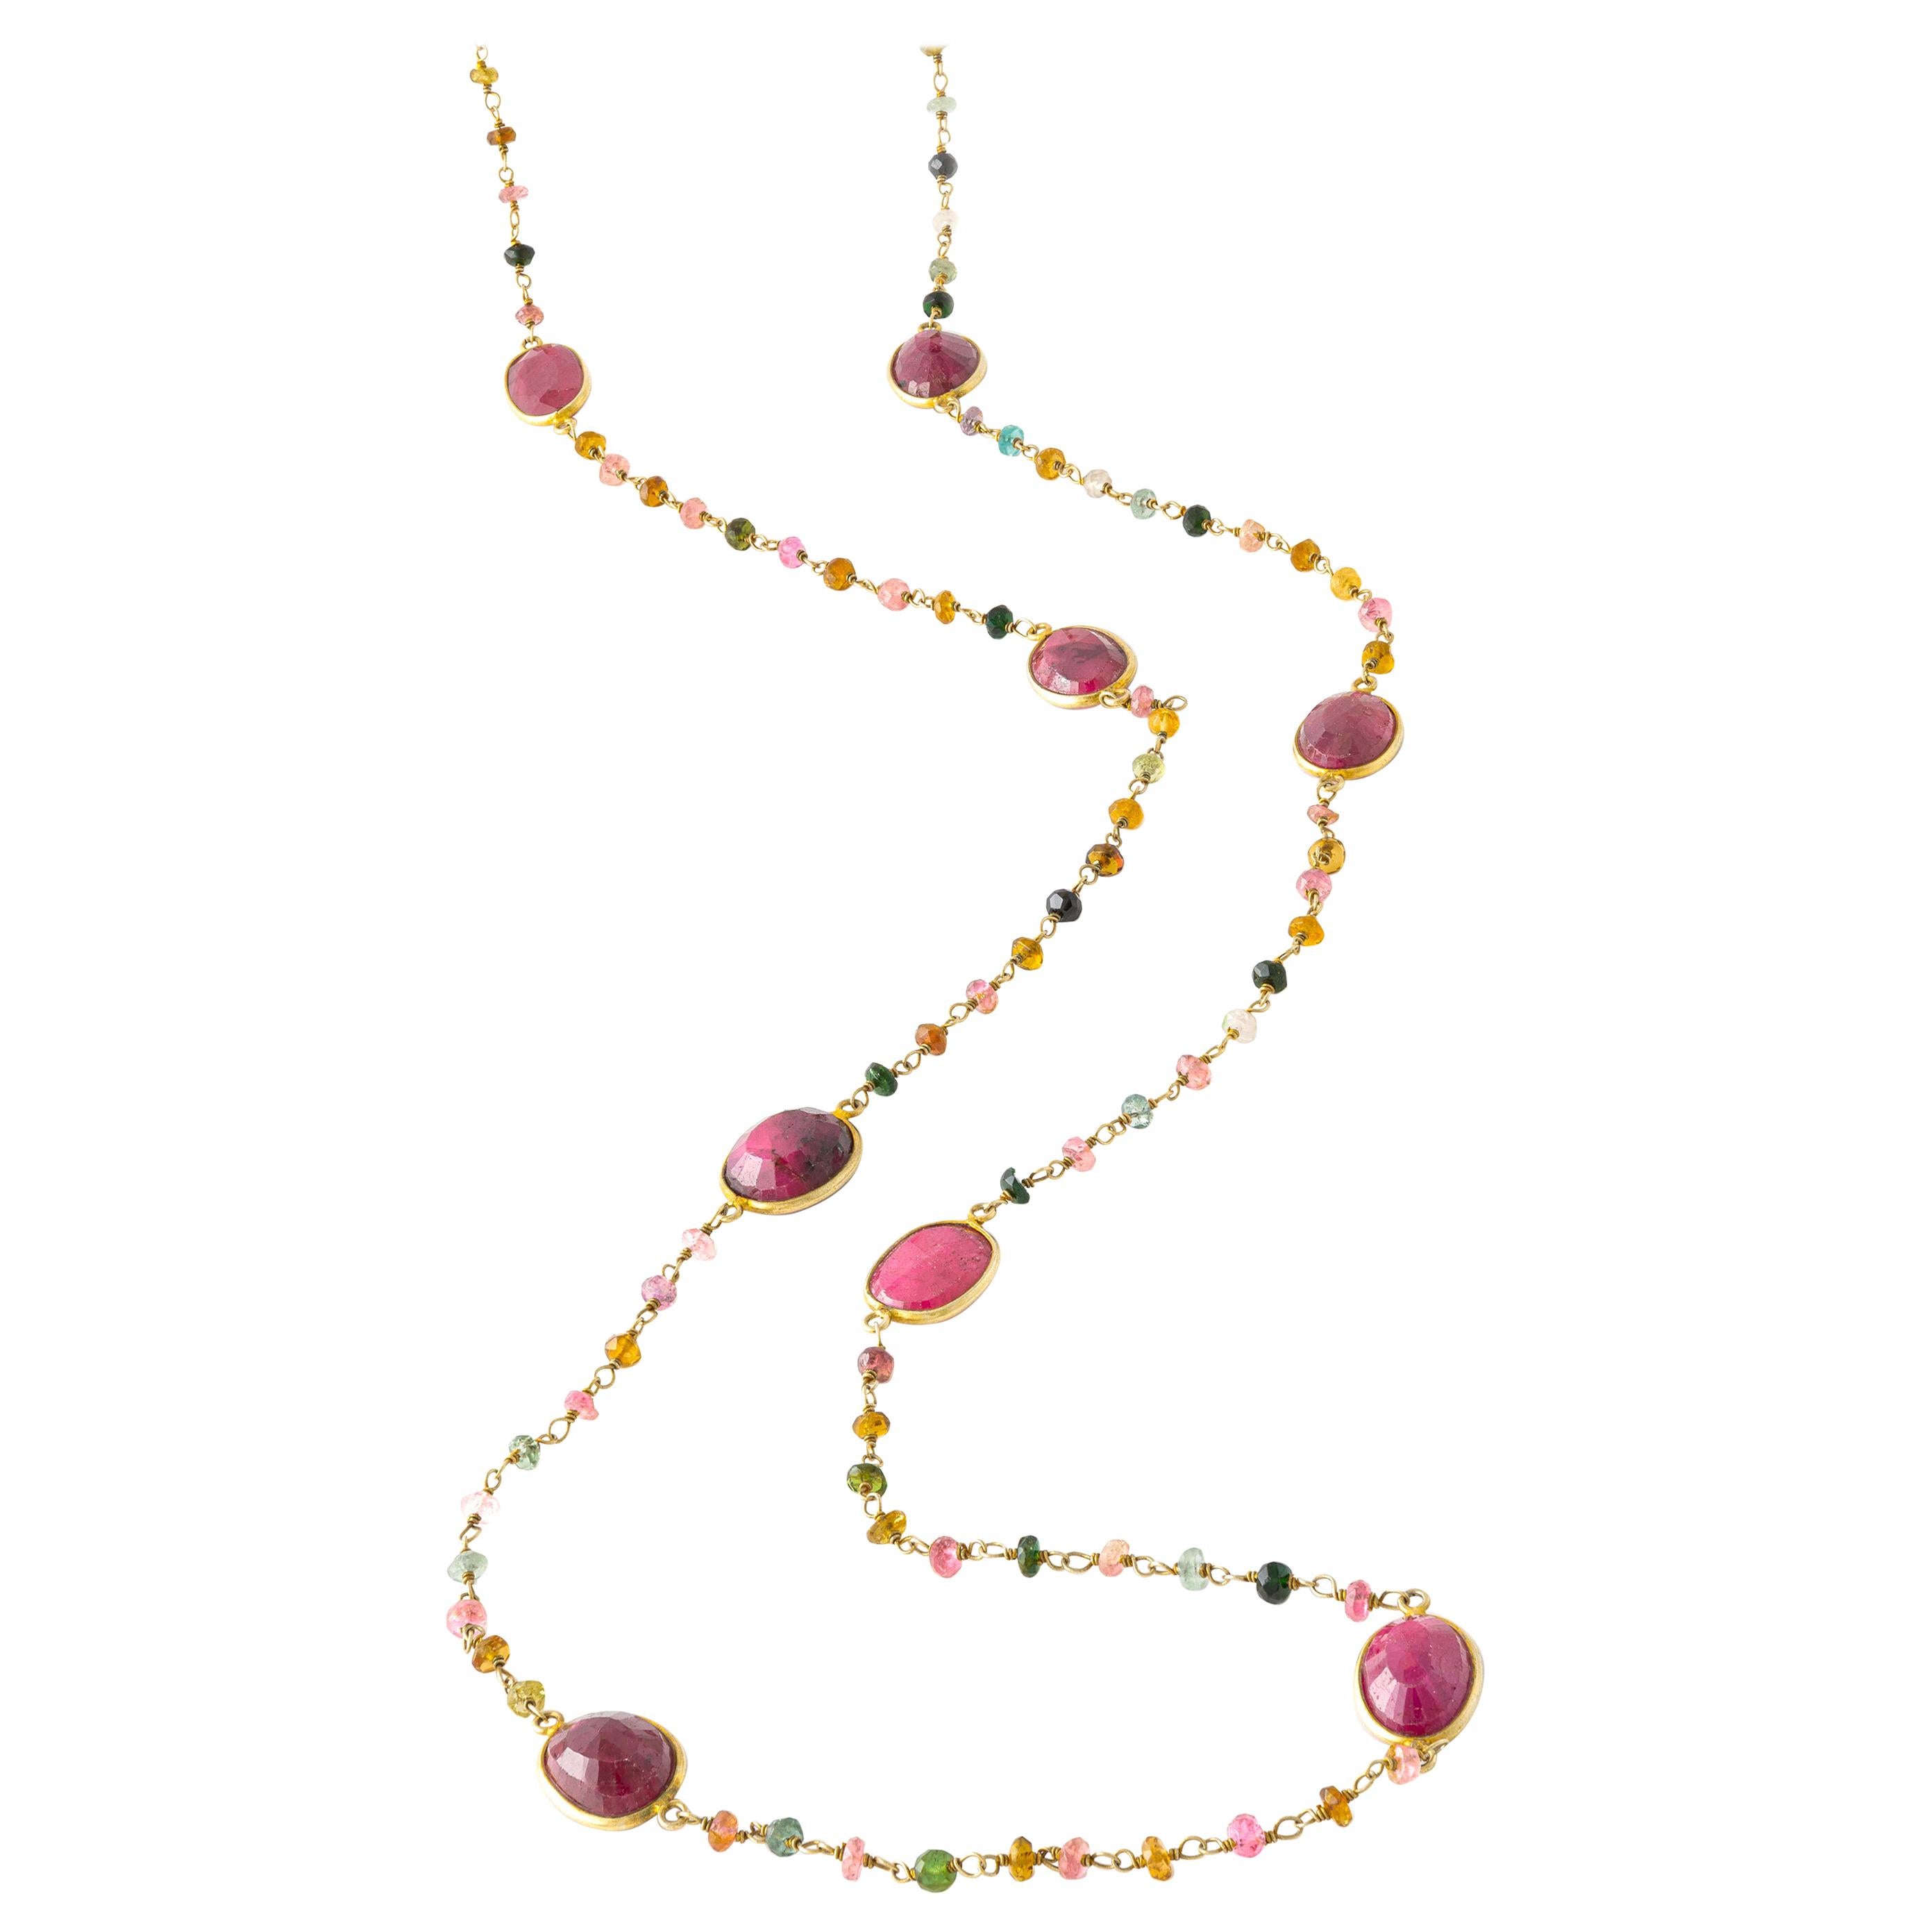 Sautoir Ruby and Precious Stones on Silver 925 Necklace